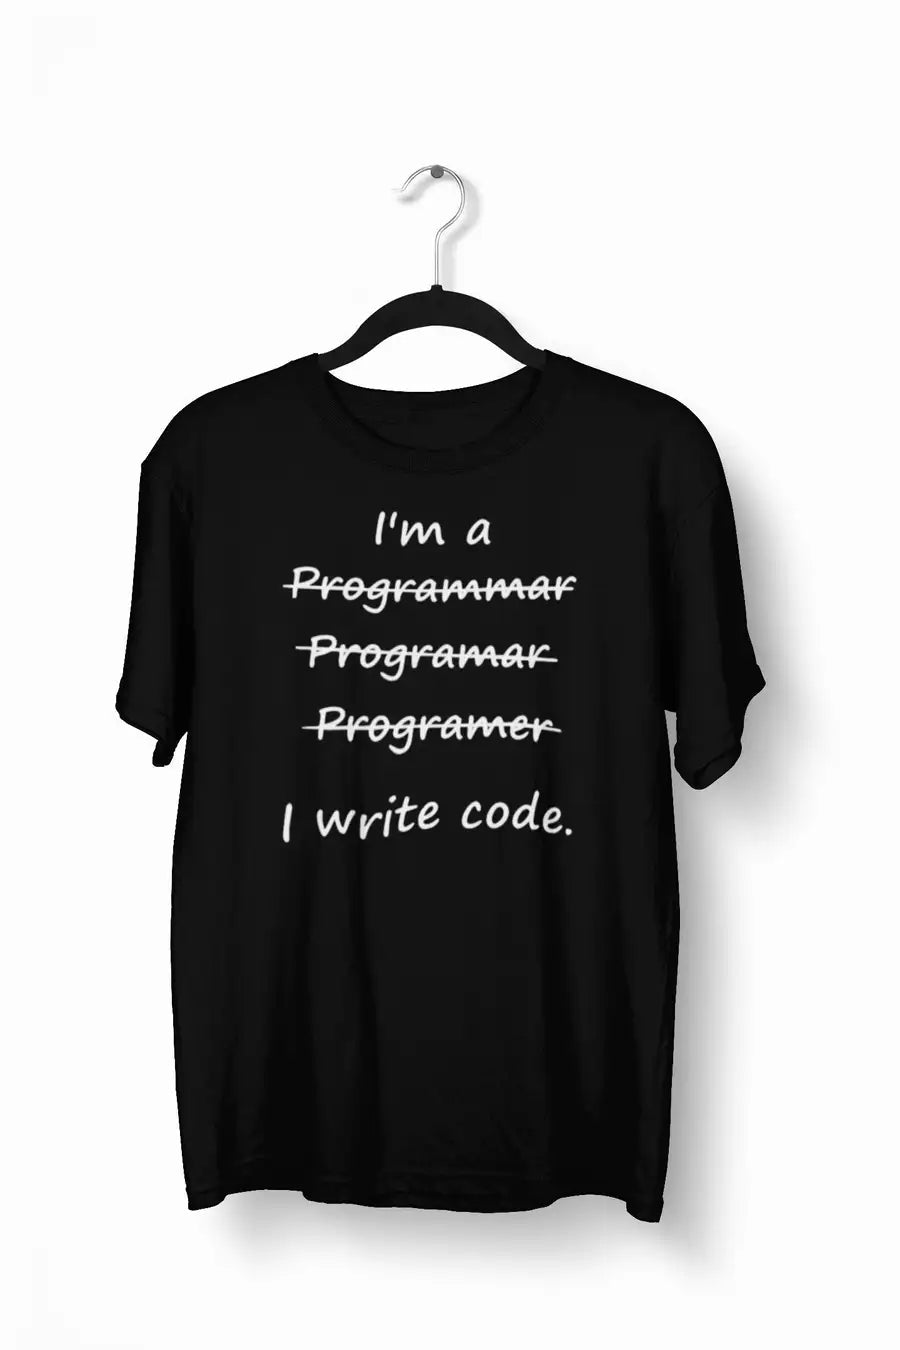 I Write Code Black T shirt for Programmers | Premium Design | Catch My Drift India - Catch My Drift India Clothing black, clothing, coding, engineer, engineering, made in india, programmer, s